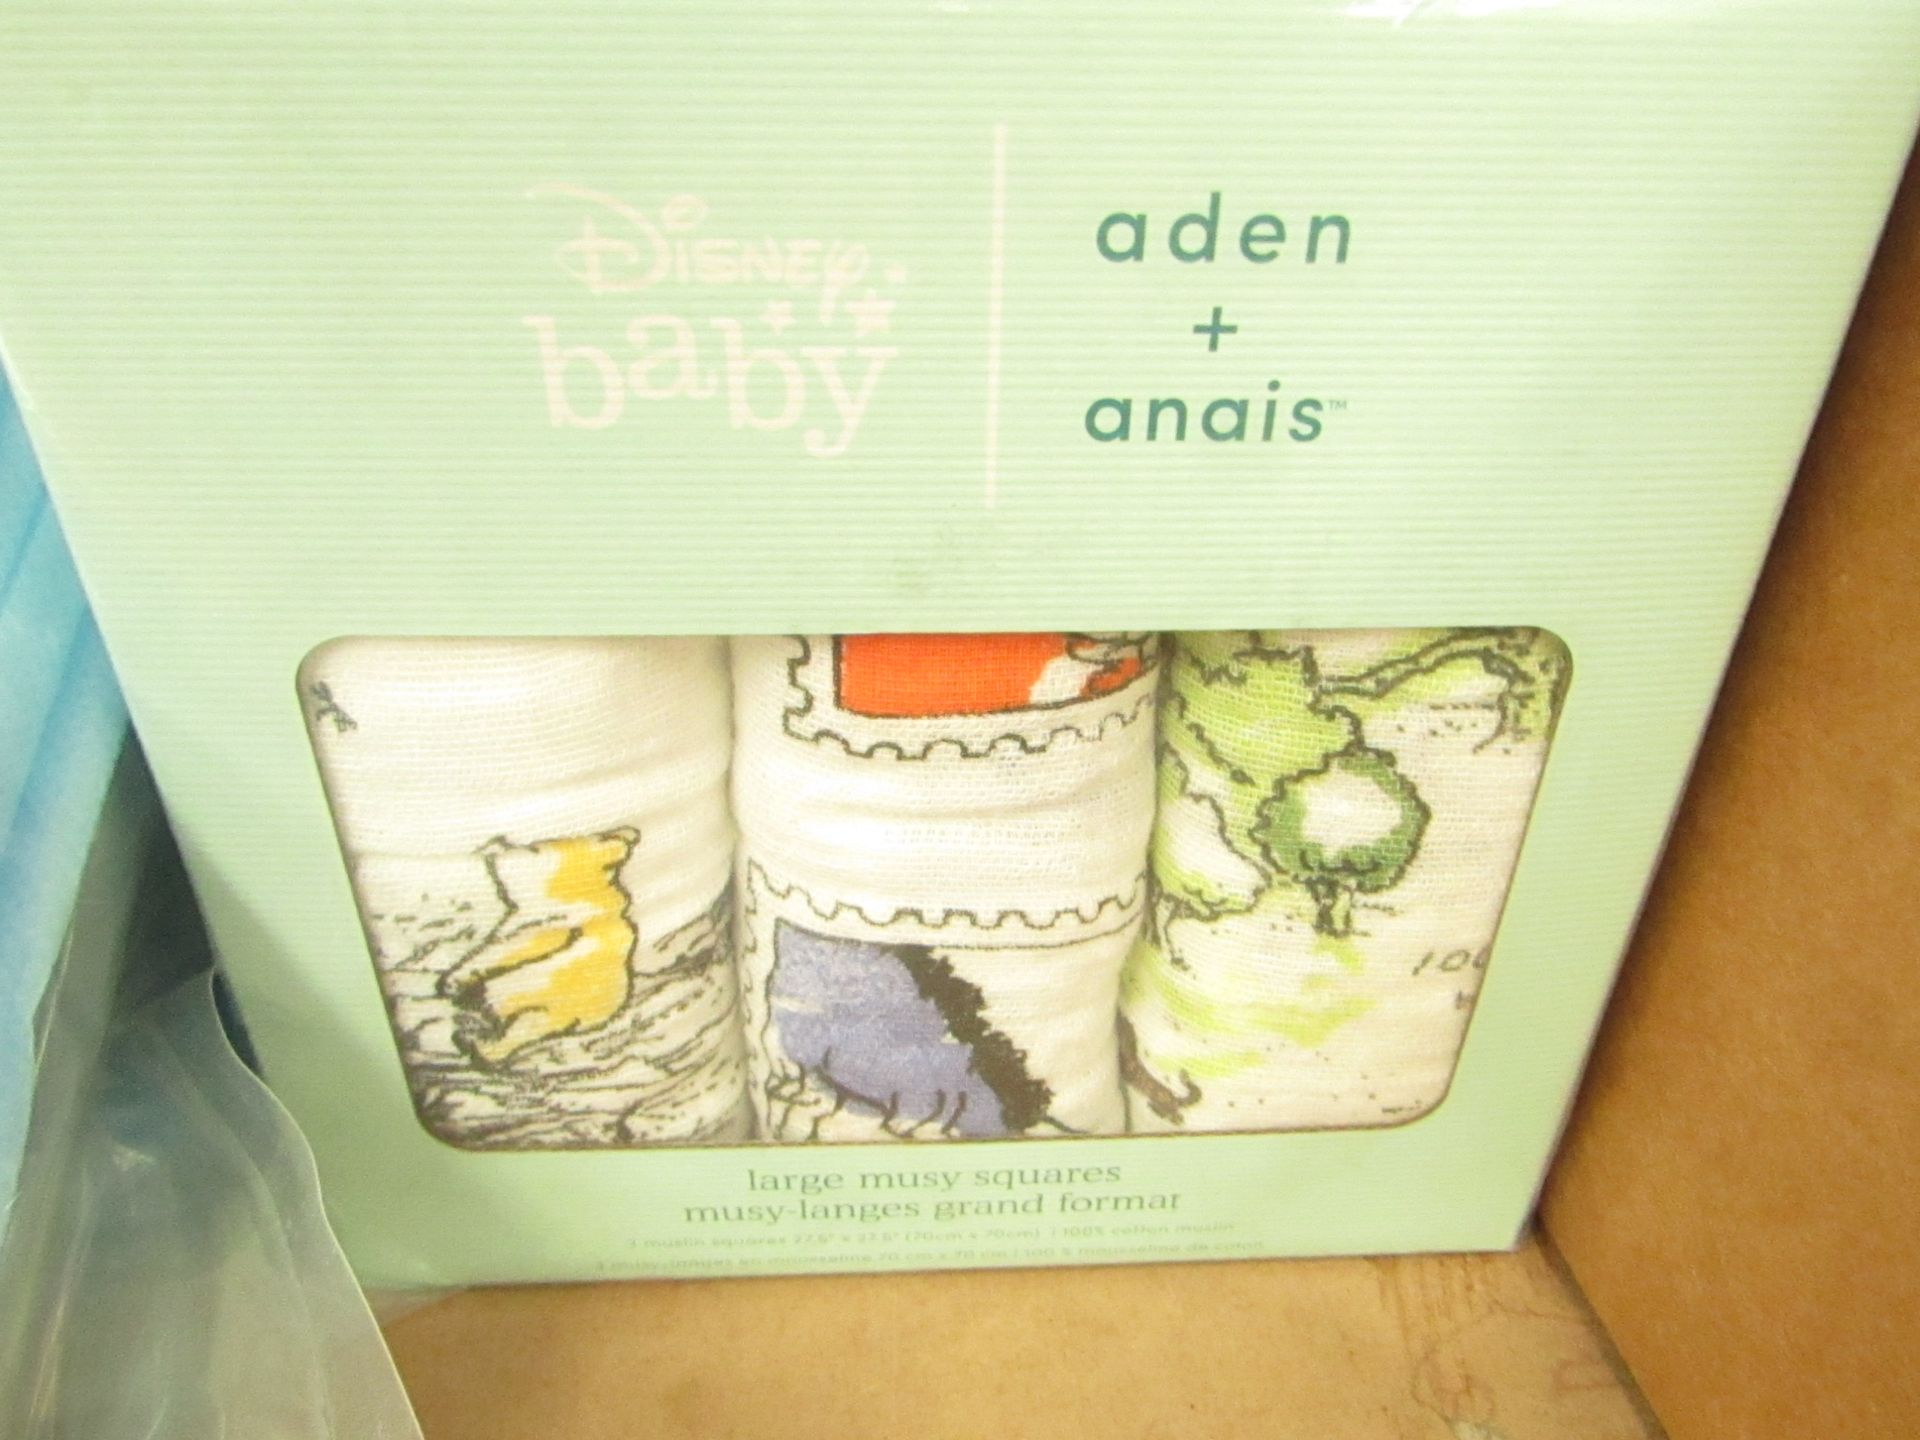 2x Aden + Anais - Disney Baby 3 Piece Set of Large Musy Squares - Unused & Boxed.